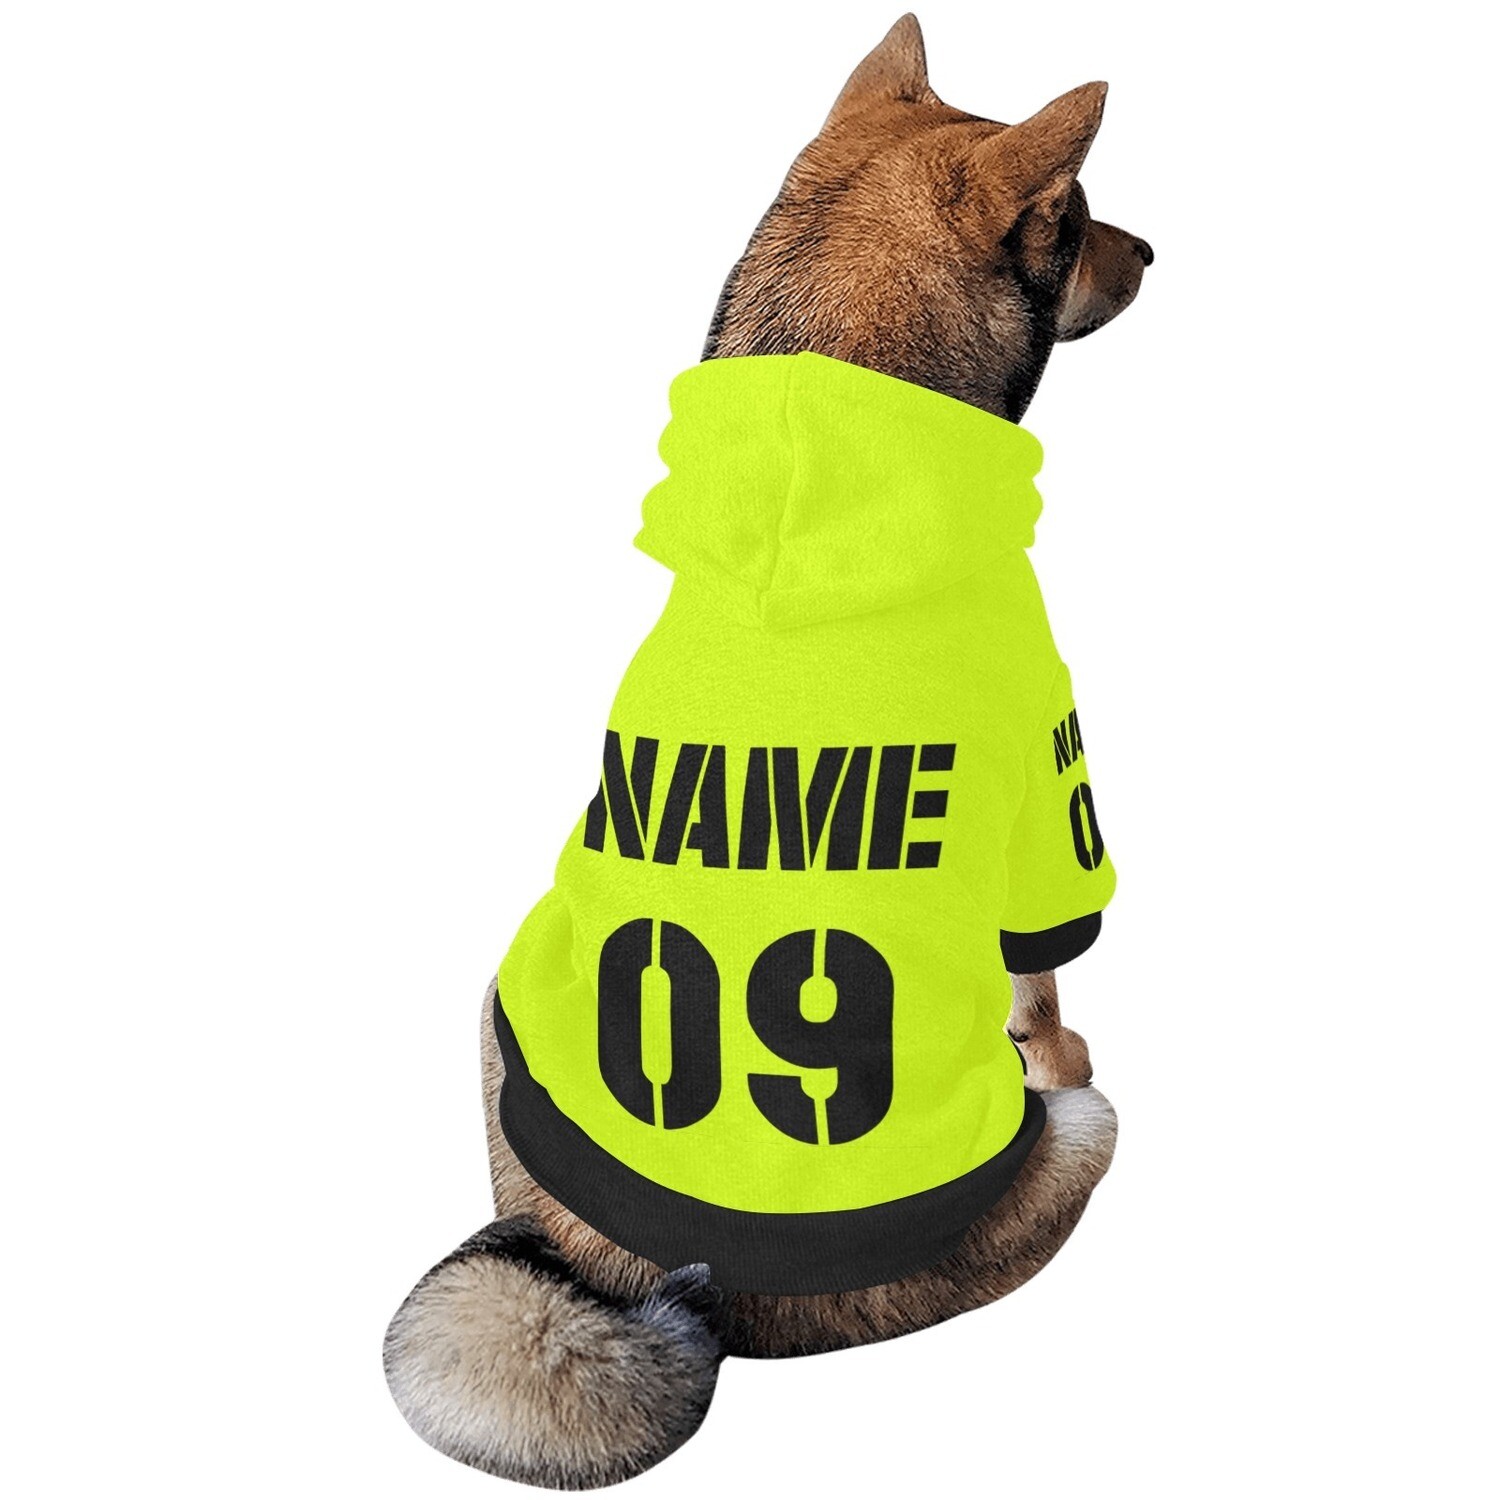 🐕 Custom Team Dog Hoodie, Sports Uniform, Personalized dog hooded sweatshirt, design your own dog hooded Sweater, add Team, Name, Num, Dog clothes, Dog clothing, Dog apparel, Gift for dogs